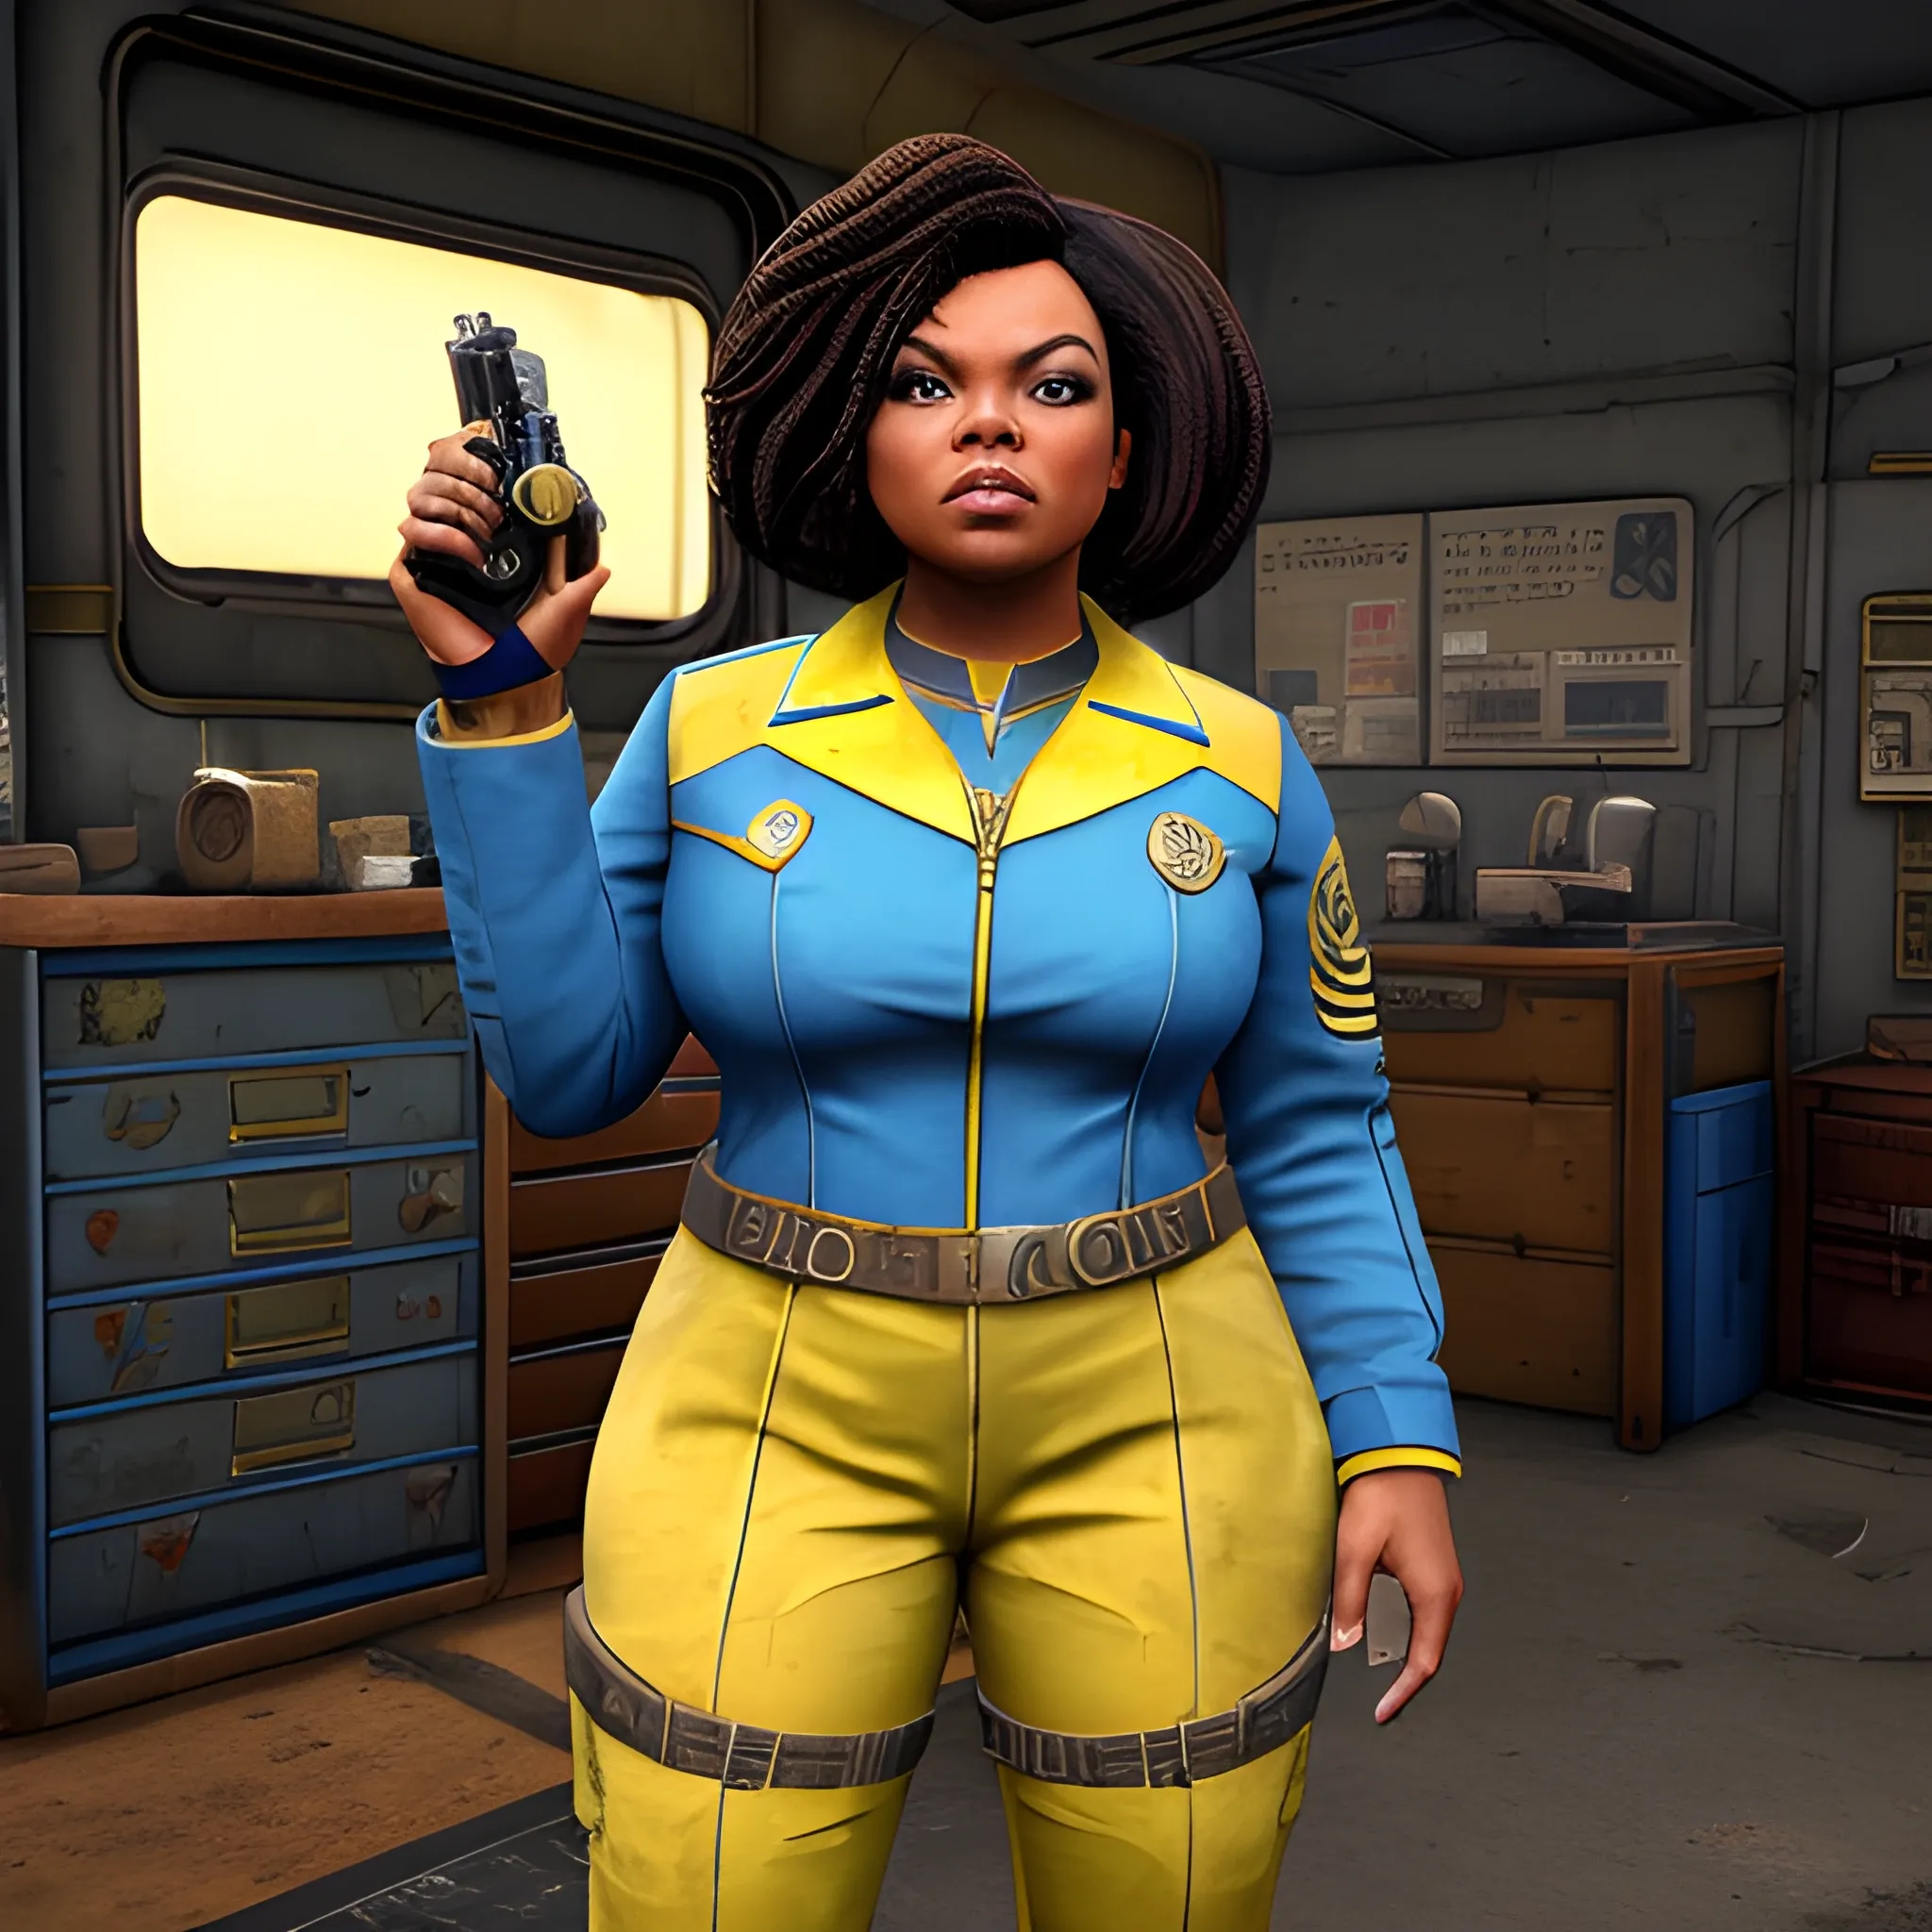 In the style of Fallout New Vegas, masterpiece, Yvette Nicole Brown as vault dweller in blue vault suit